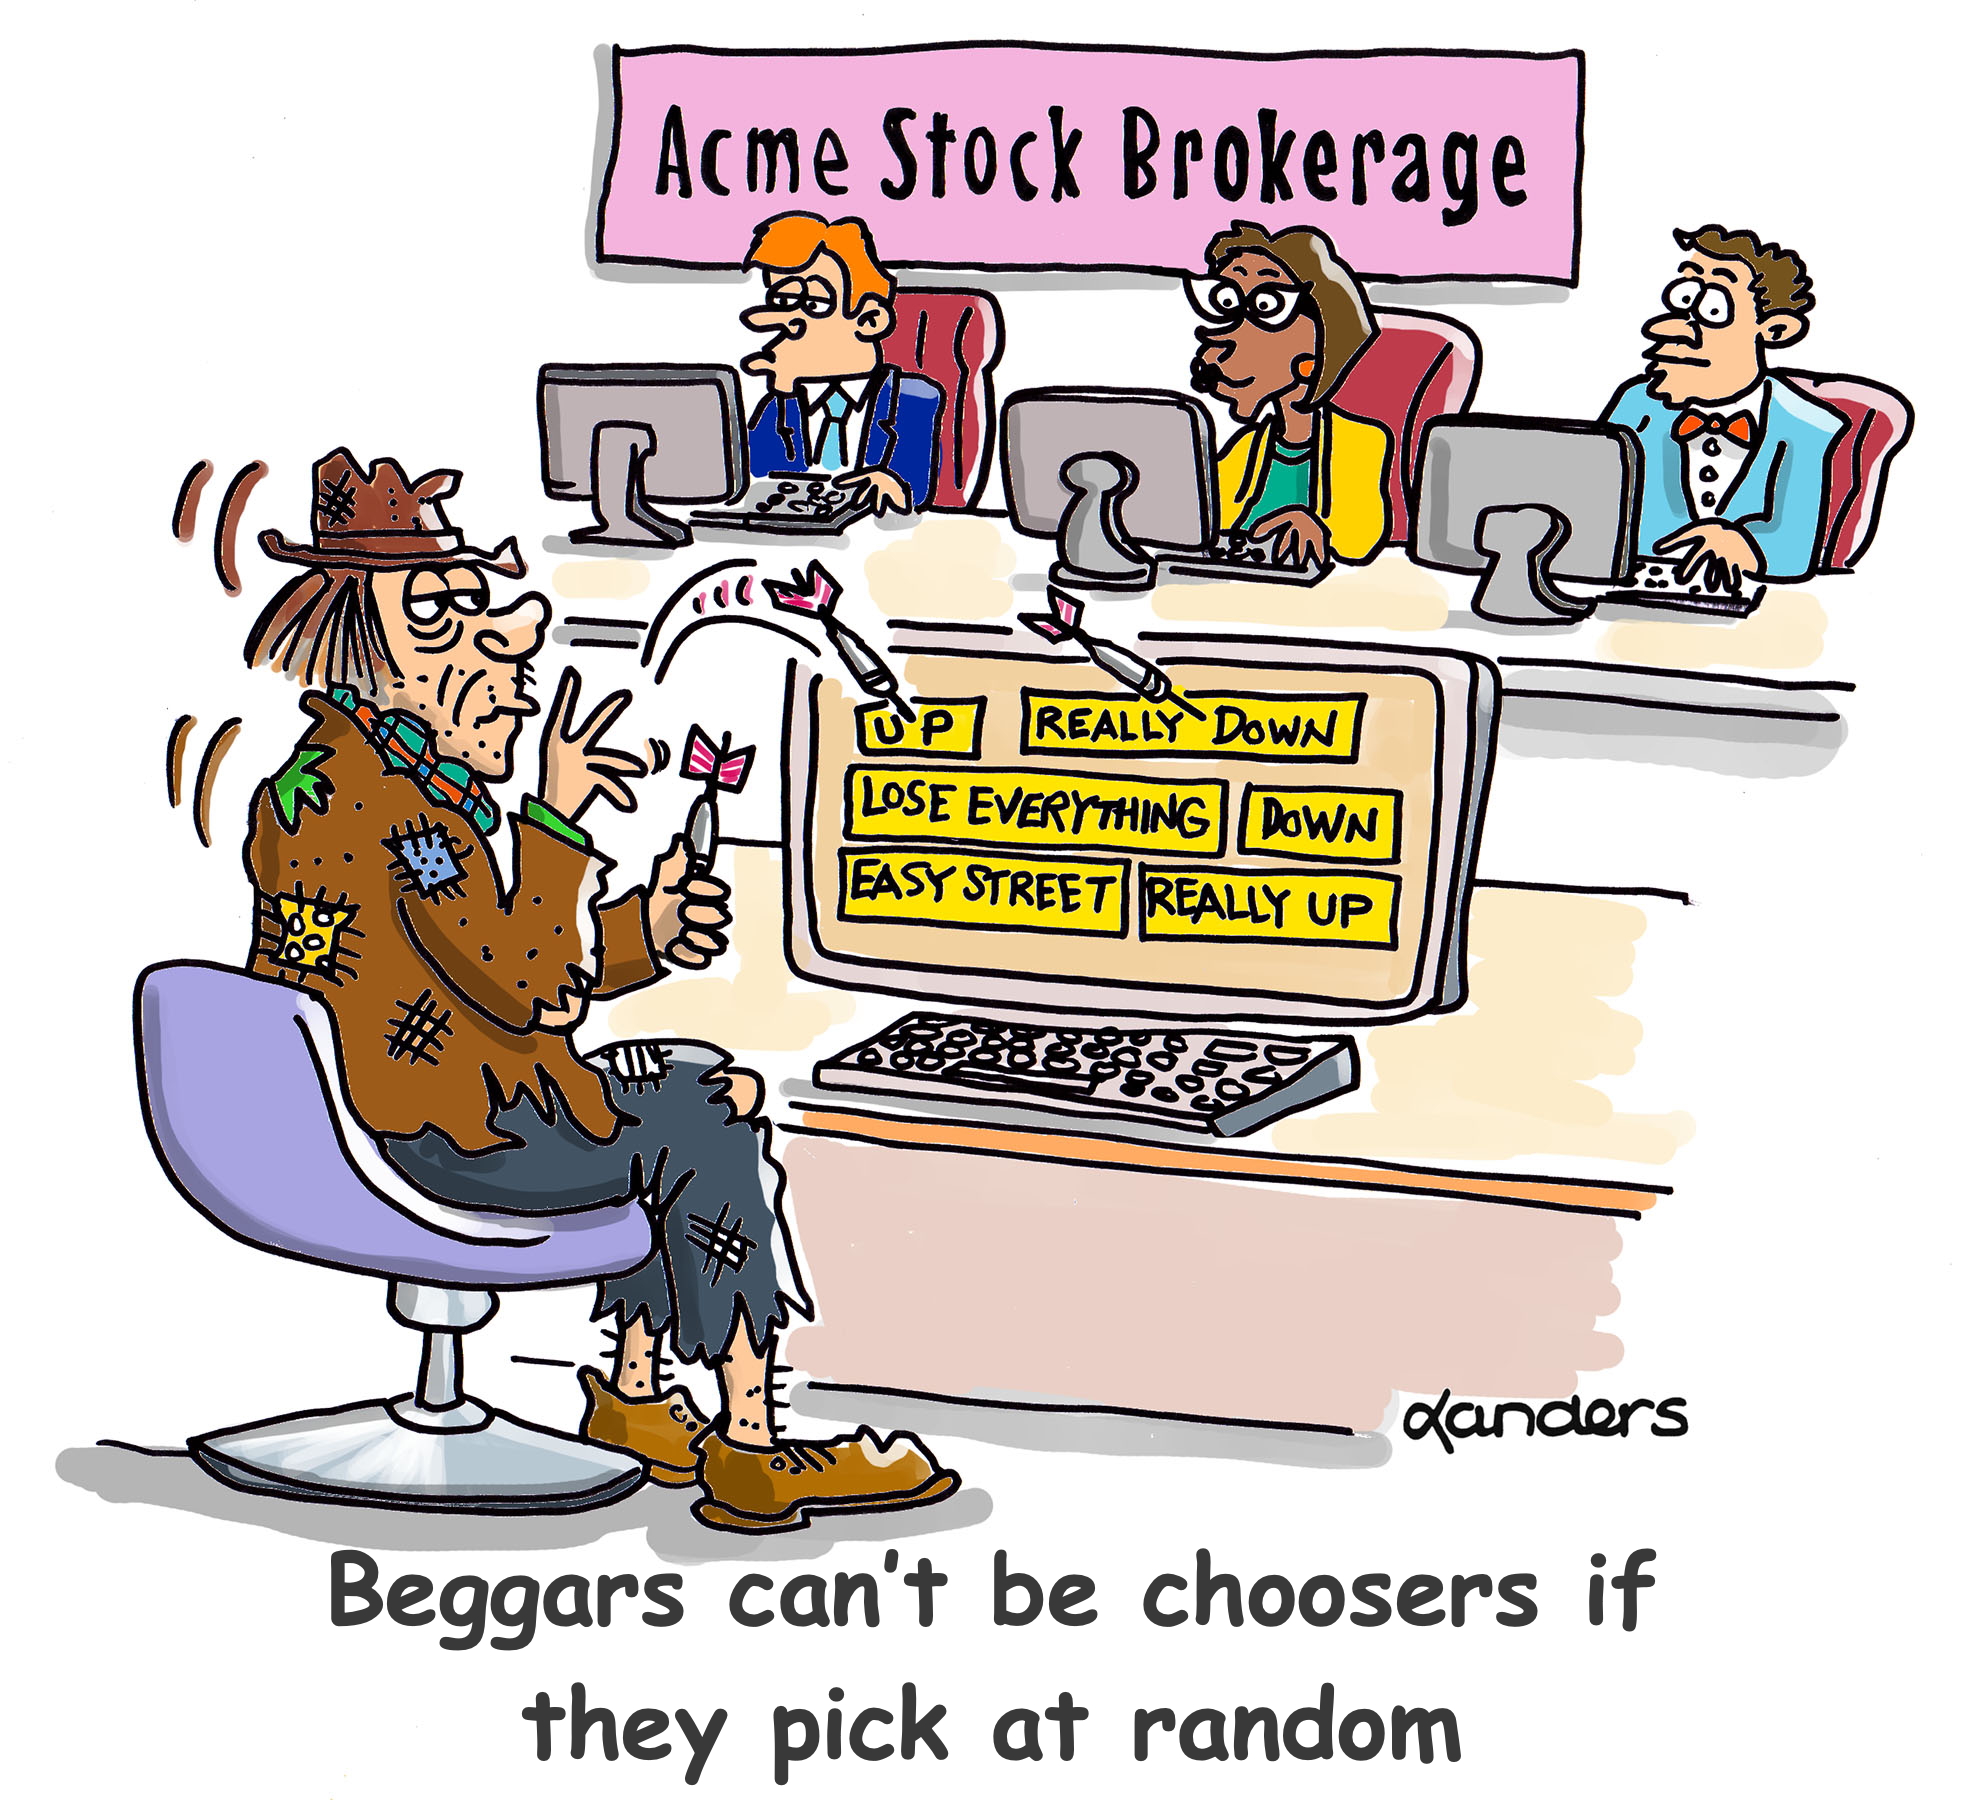 cartoon showing a stock brokerage with one broker in raggedy clothes throwing darts at a screen